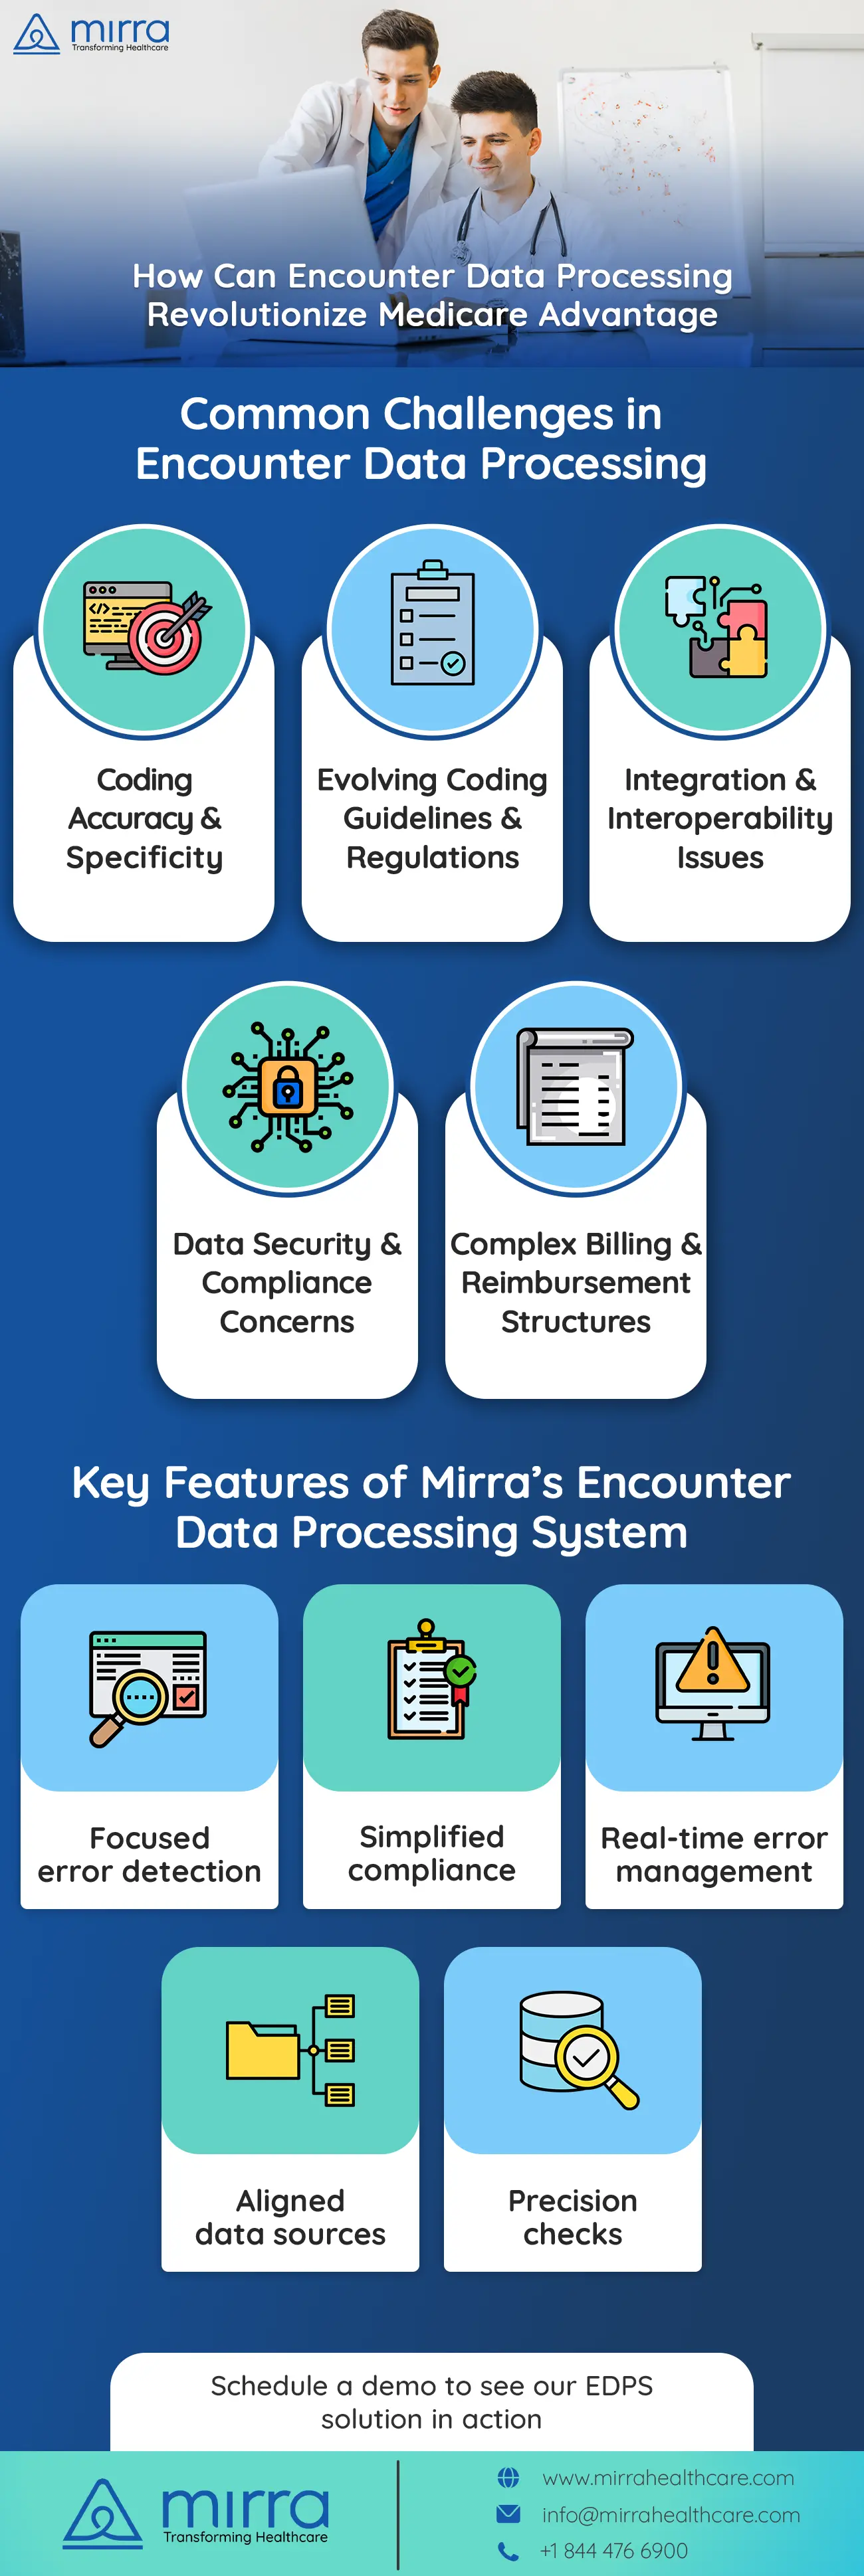 Enhance Your Claims Processing with Mirra\'s Advanced Technology Solution